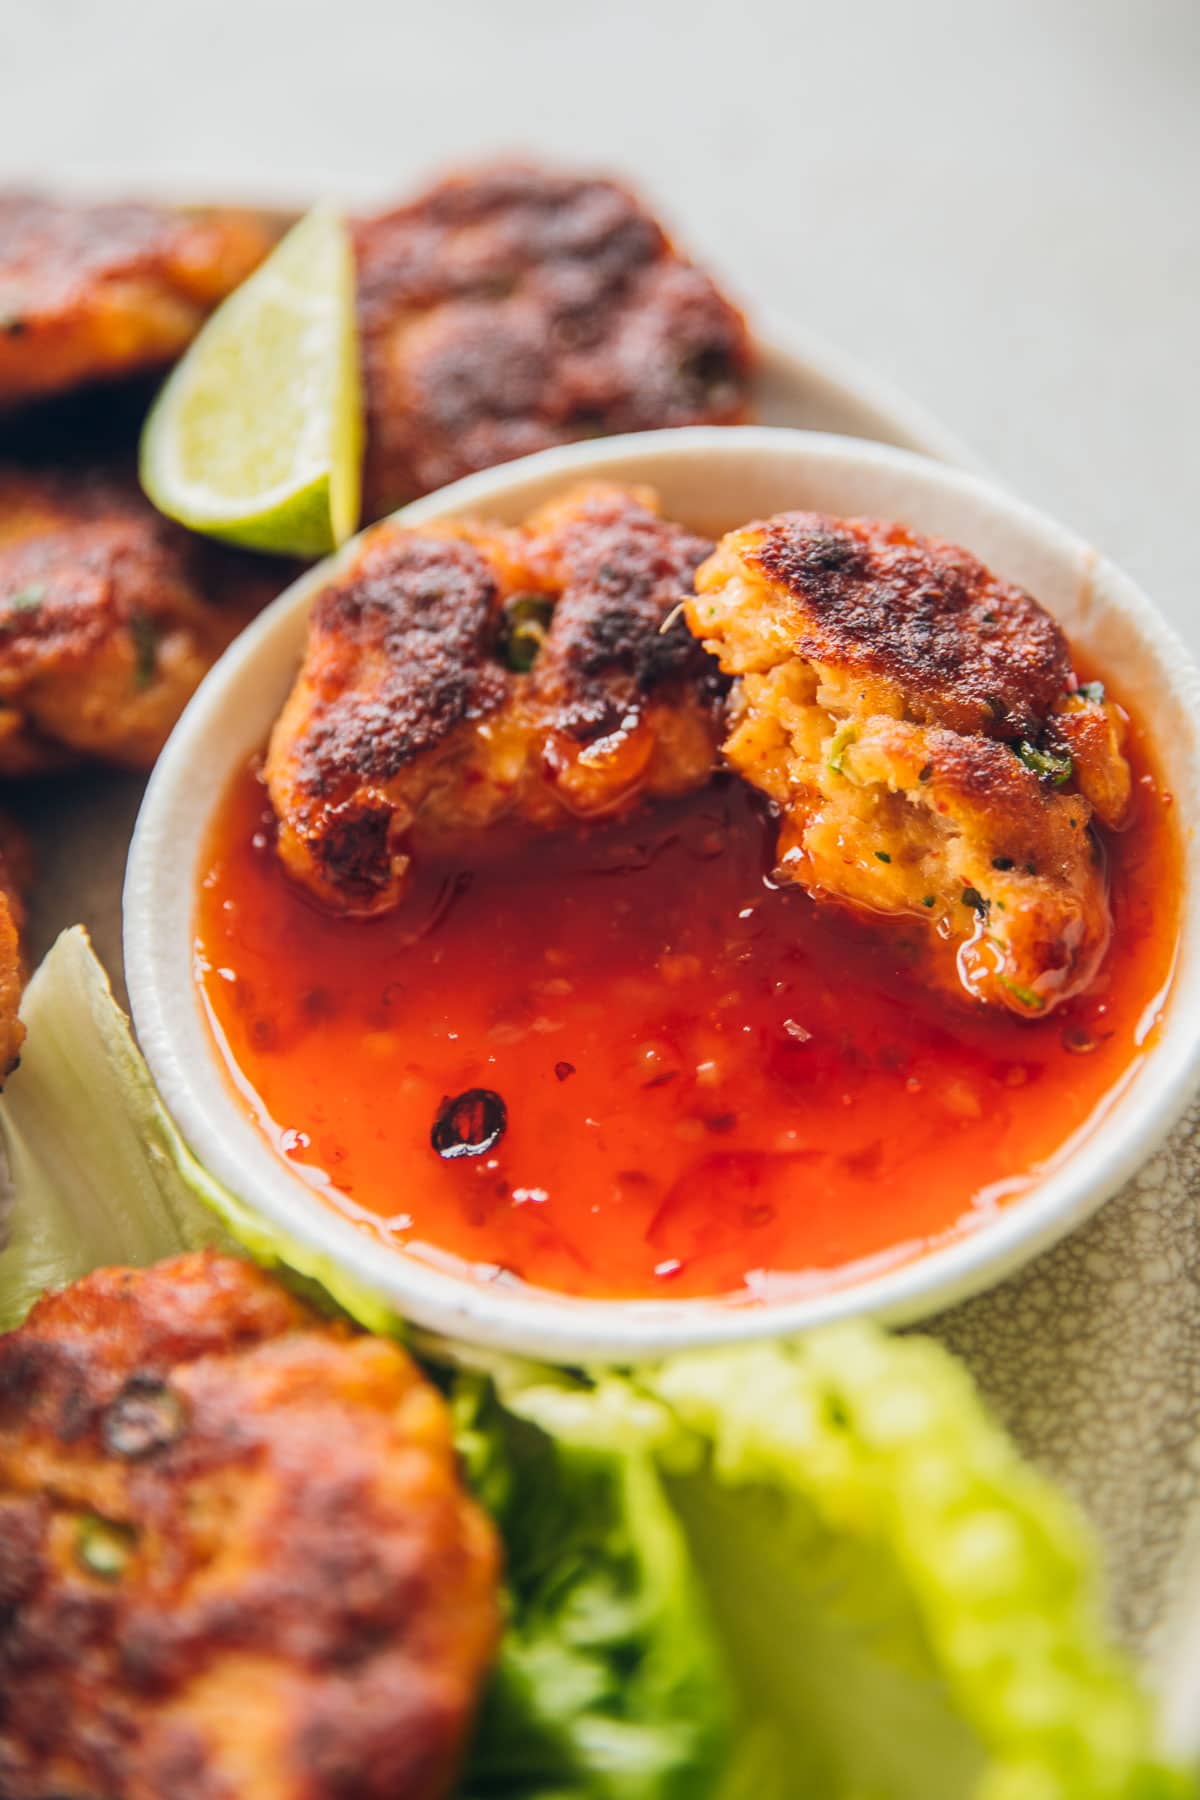 Thai Fish Cakes dipped in sweet chilli sauce.